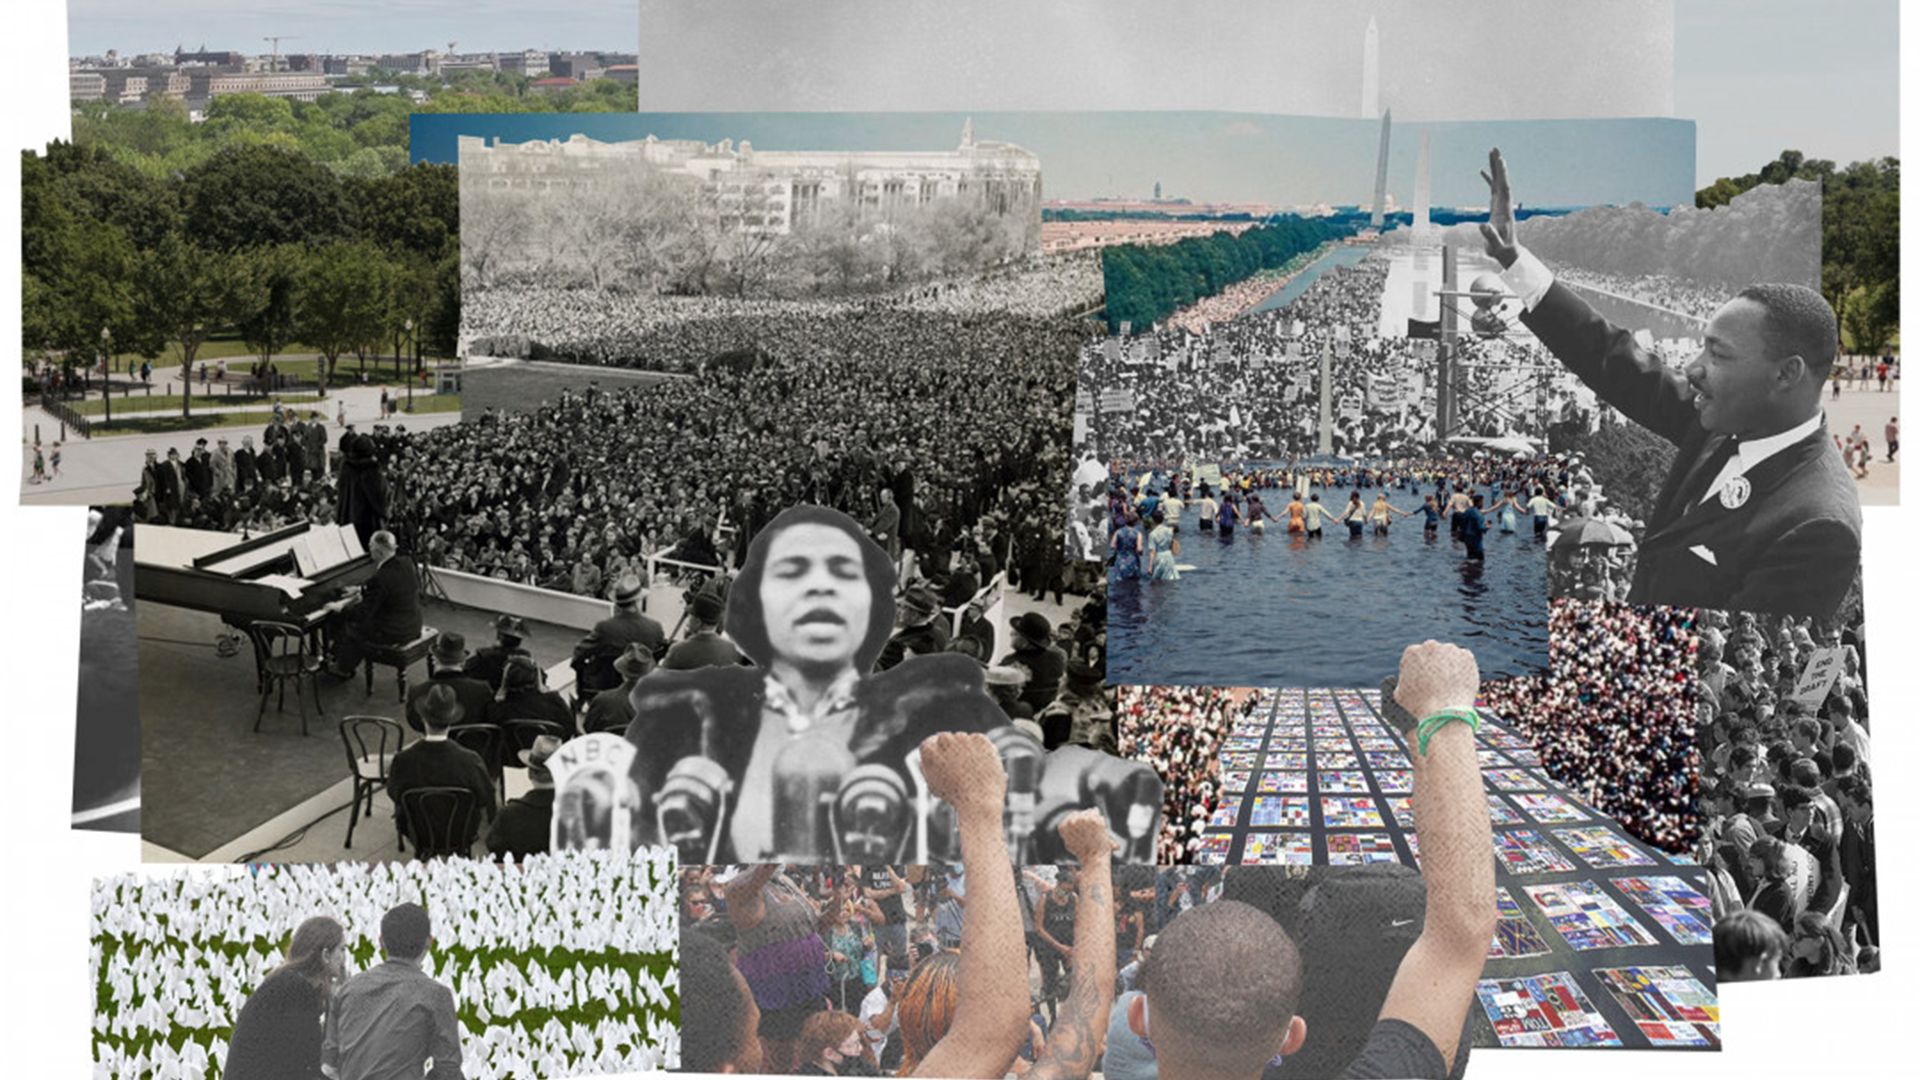 Collage of images from the history of the national mall.